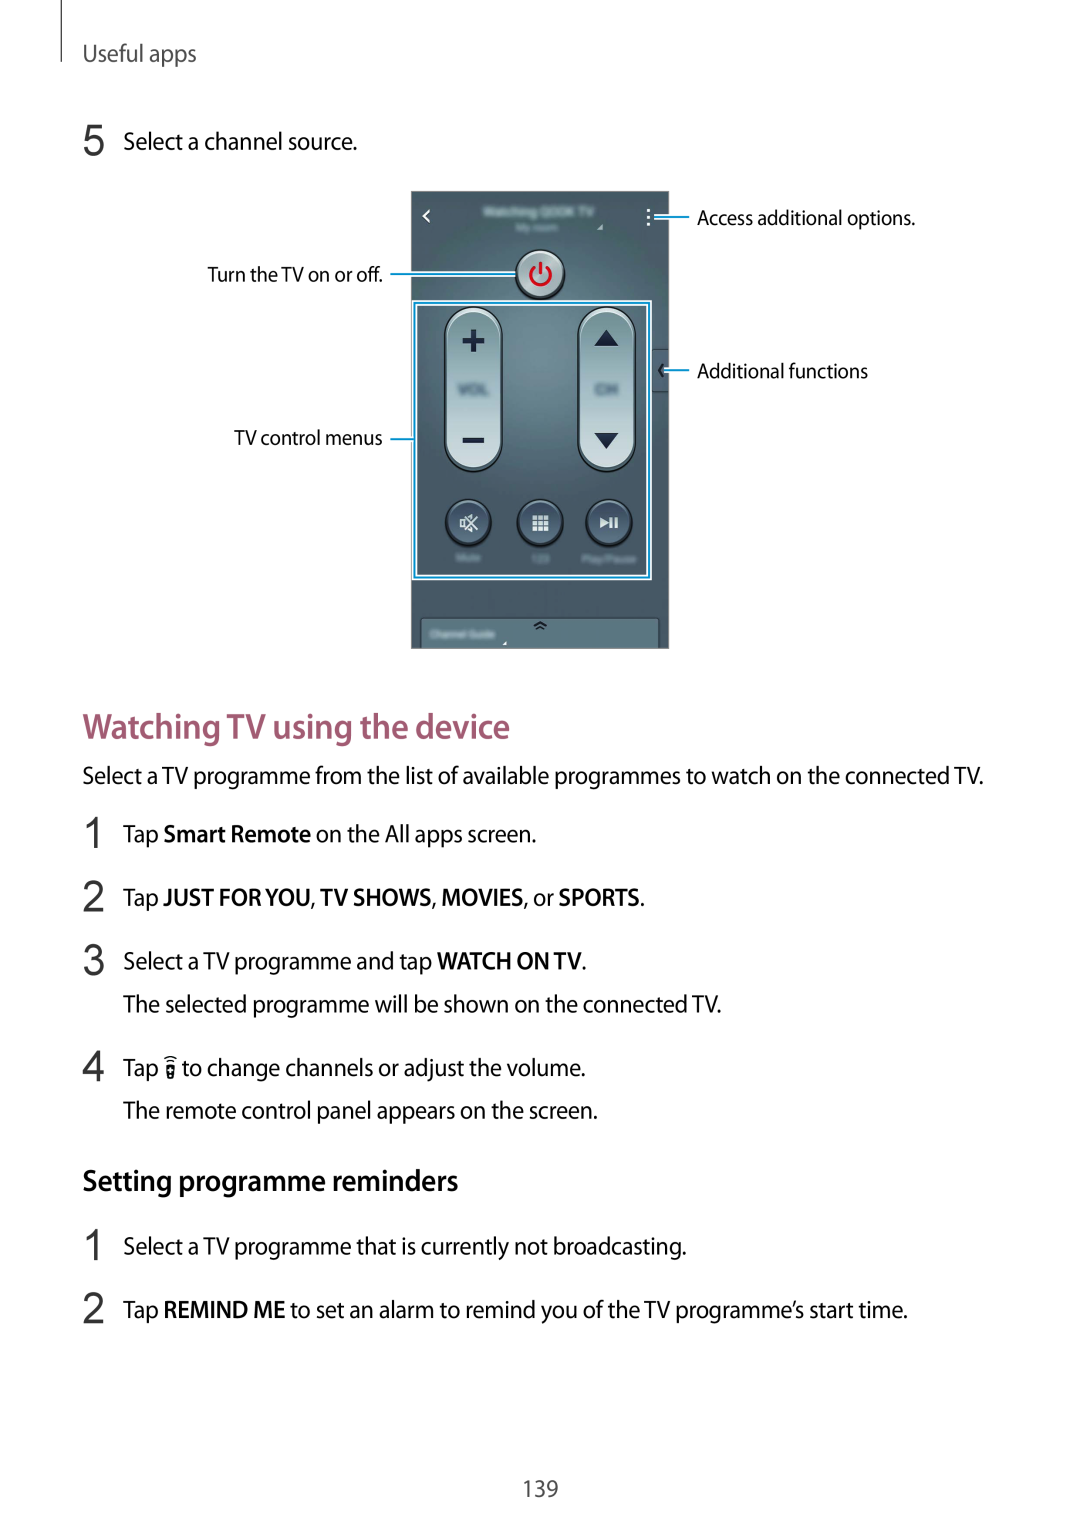 Samsung SM-N915FZKYITV, SM-N915FZWYEUR manual Watching TV using the device, Setting programme reminders, Useful apps 